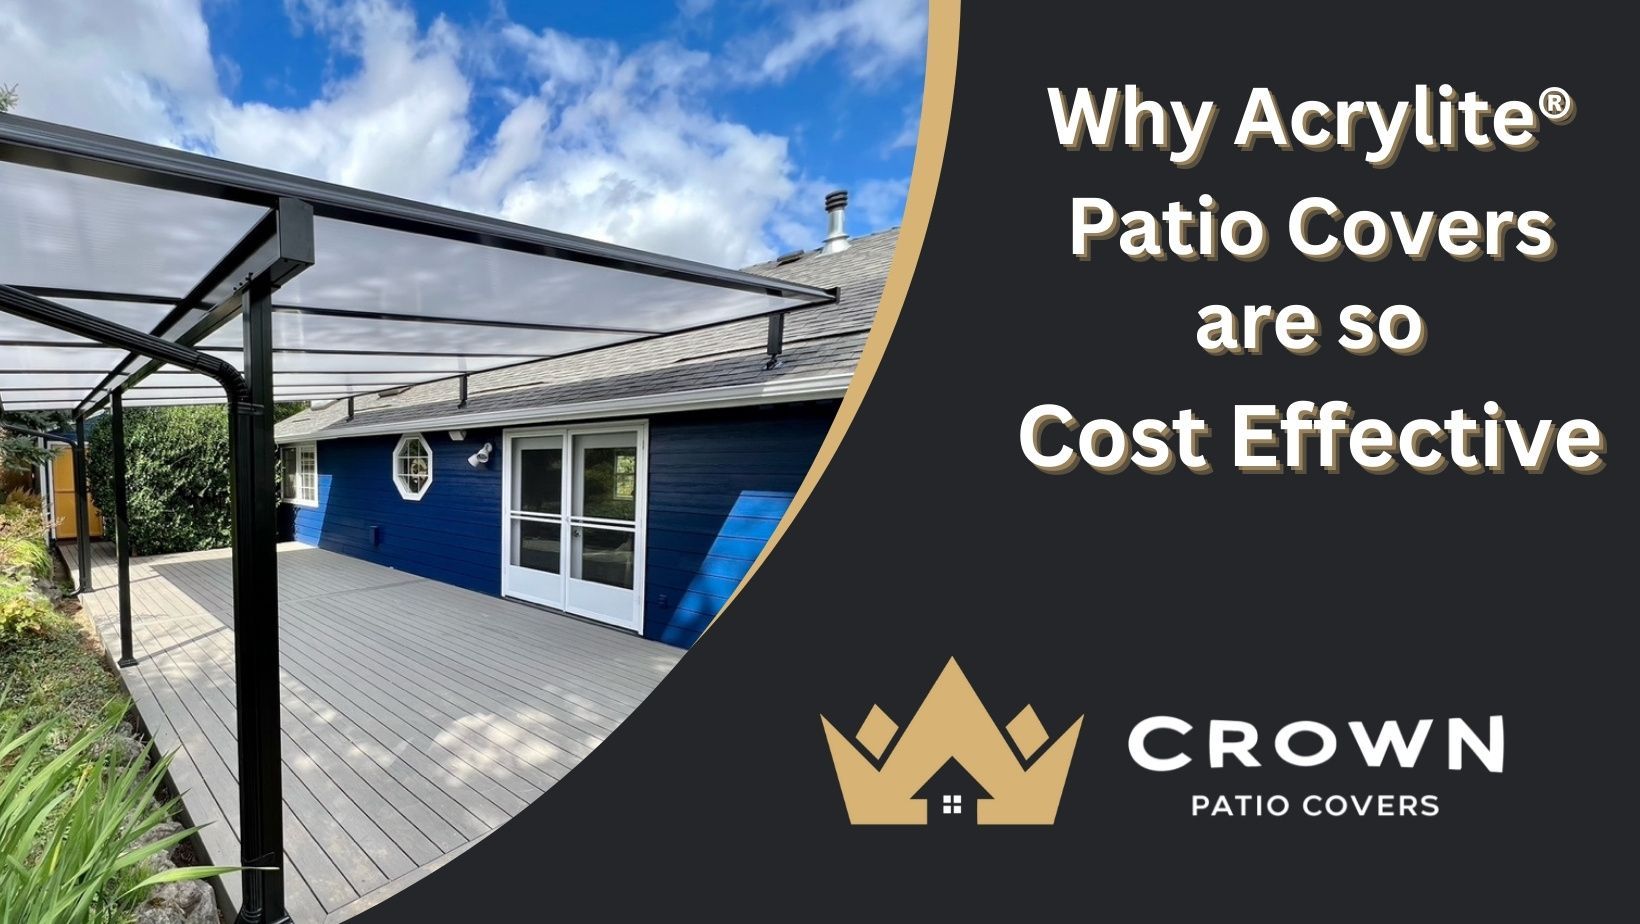 Why Acrylite Patio Covers are so much more Cost Effective then Wood